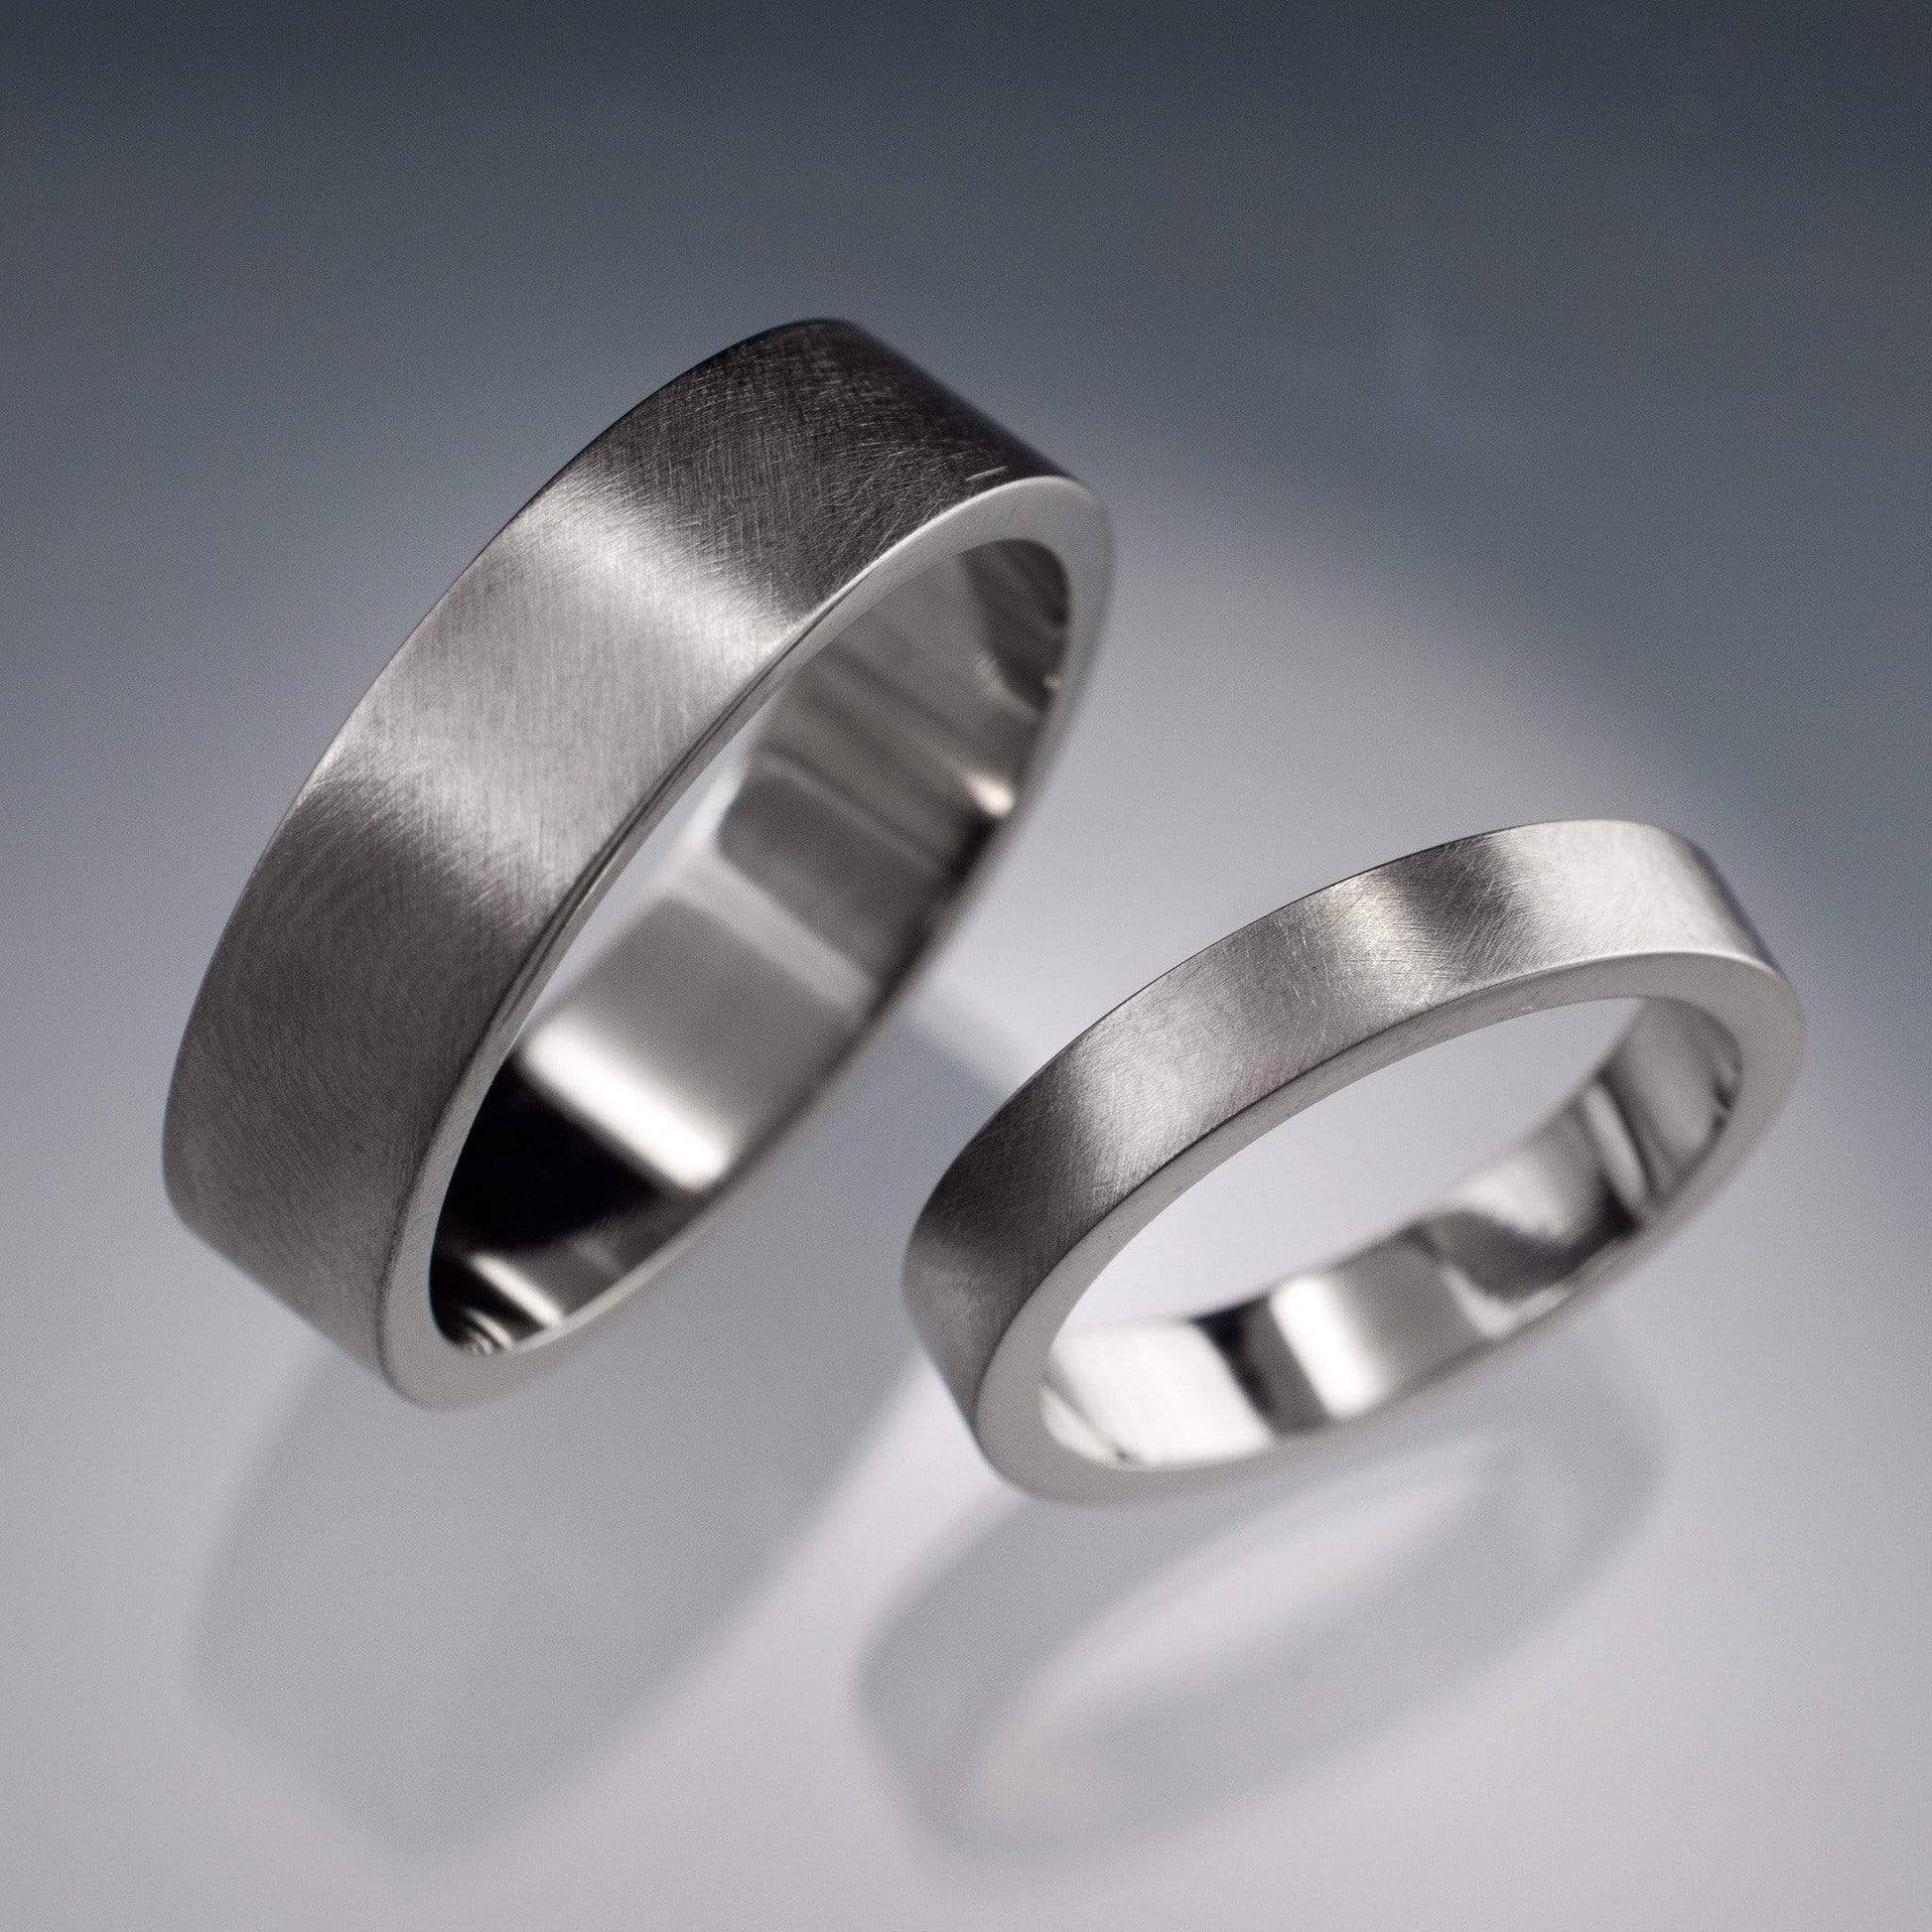 Simple Flat Style Wedding Bands, Set of 2 Wedding Rings Sterling Silver Ring Set by Nodeform